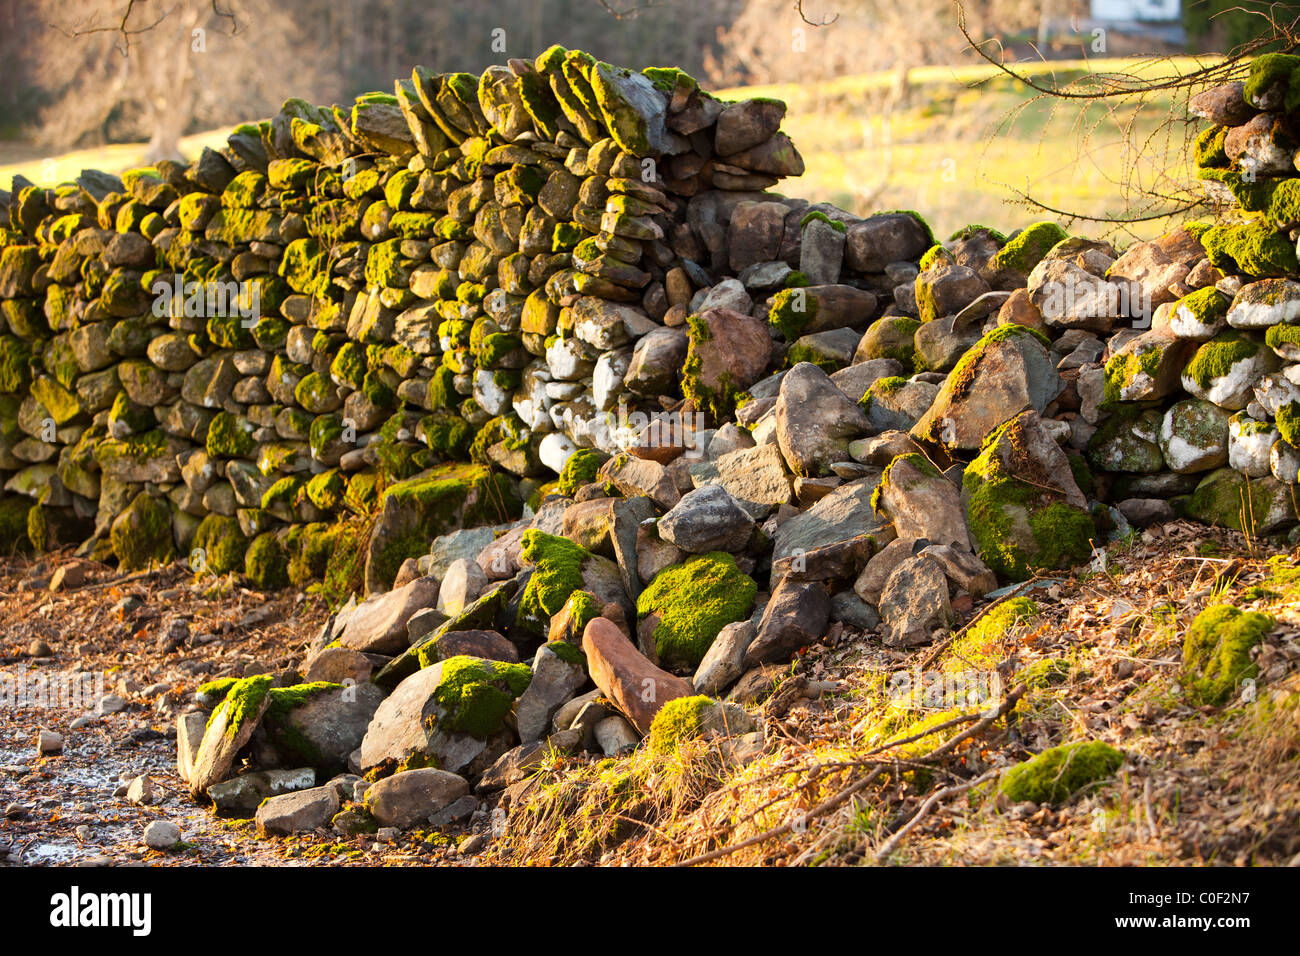 A dry stone wall collapsed in Ambleside, Lake District, UK. Stock Photo